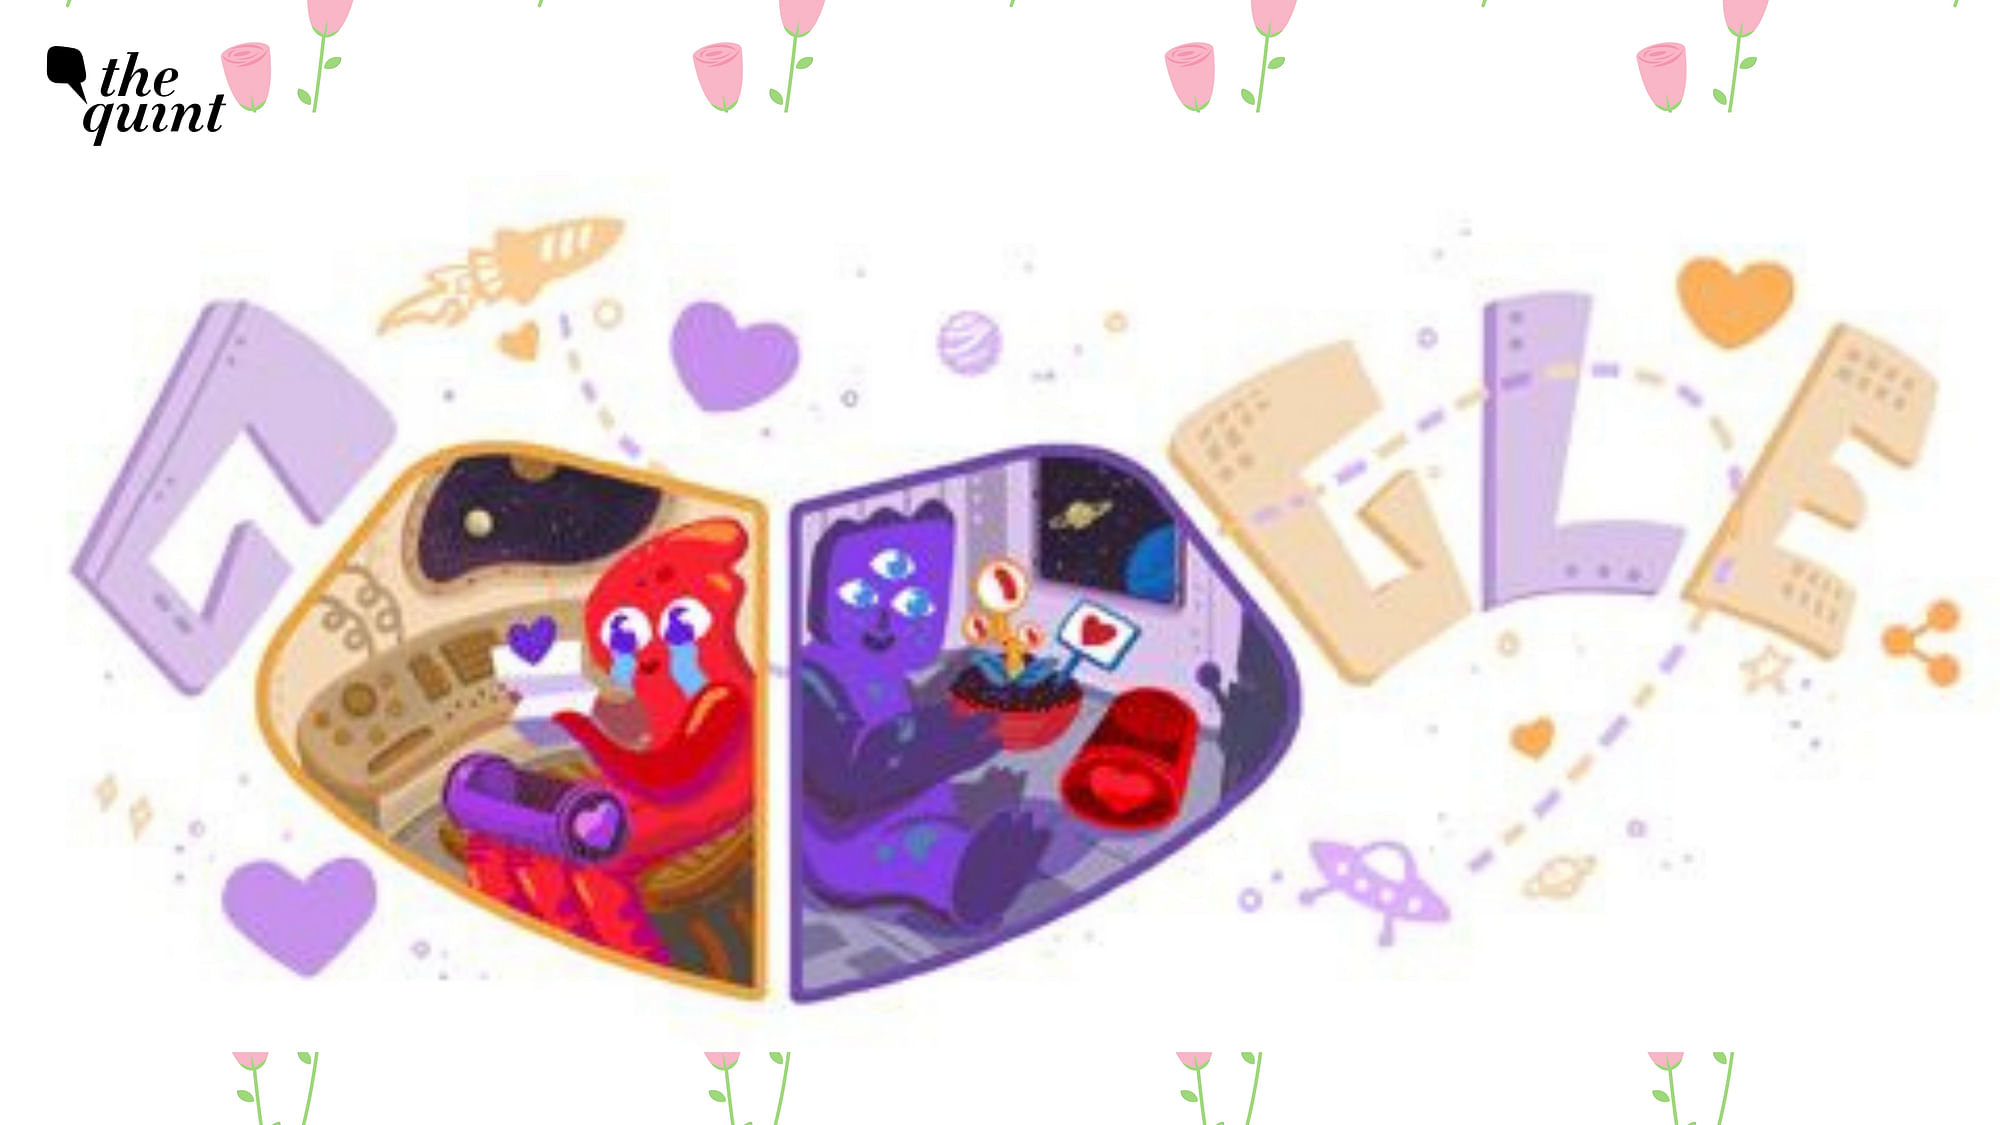 Google's new doodle on Valentine's Day doesn't get a India release